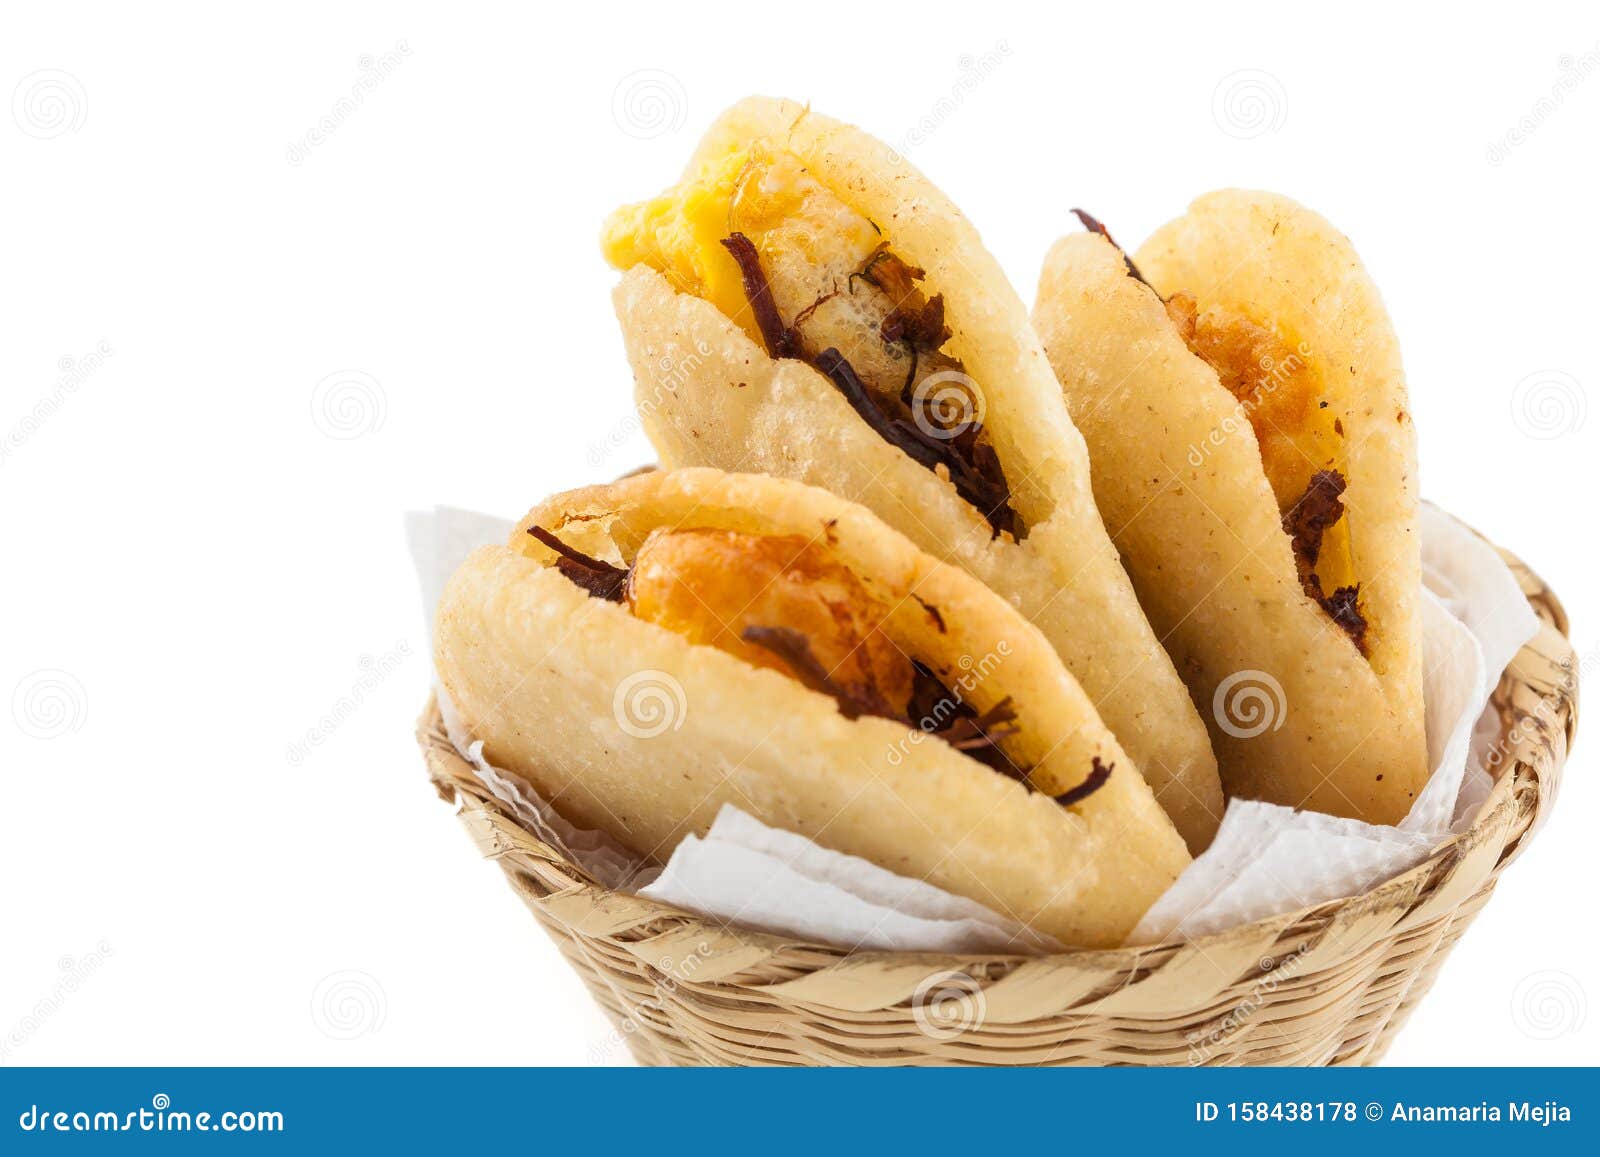 arepa de huevo. traditional colombian fried arepa filled with egg and shredded meat on white background